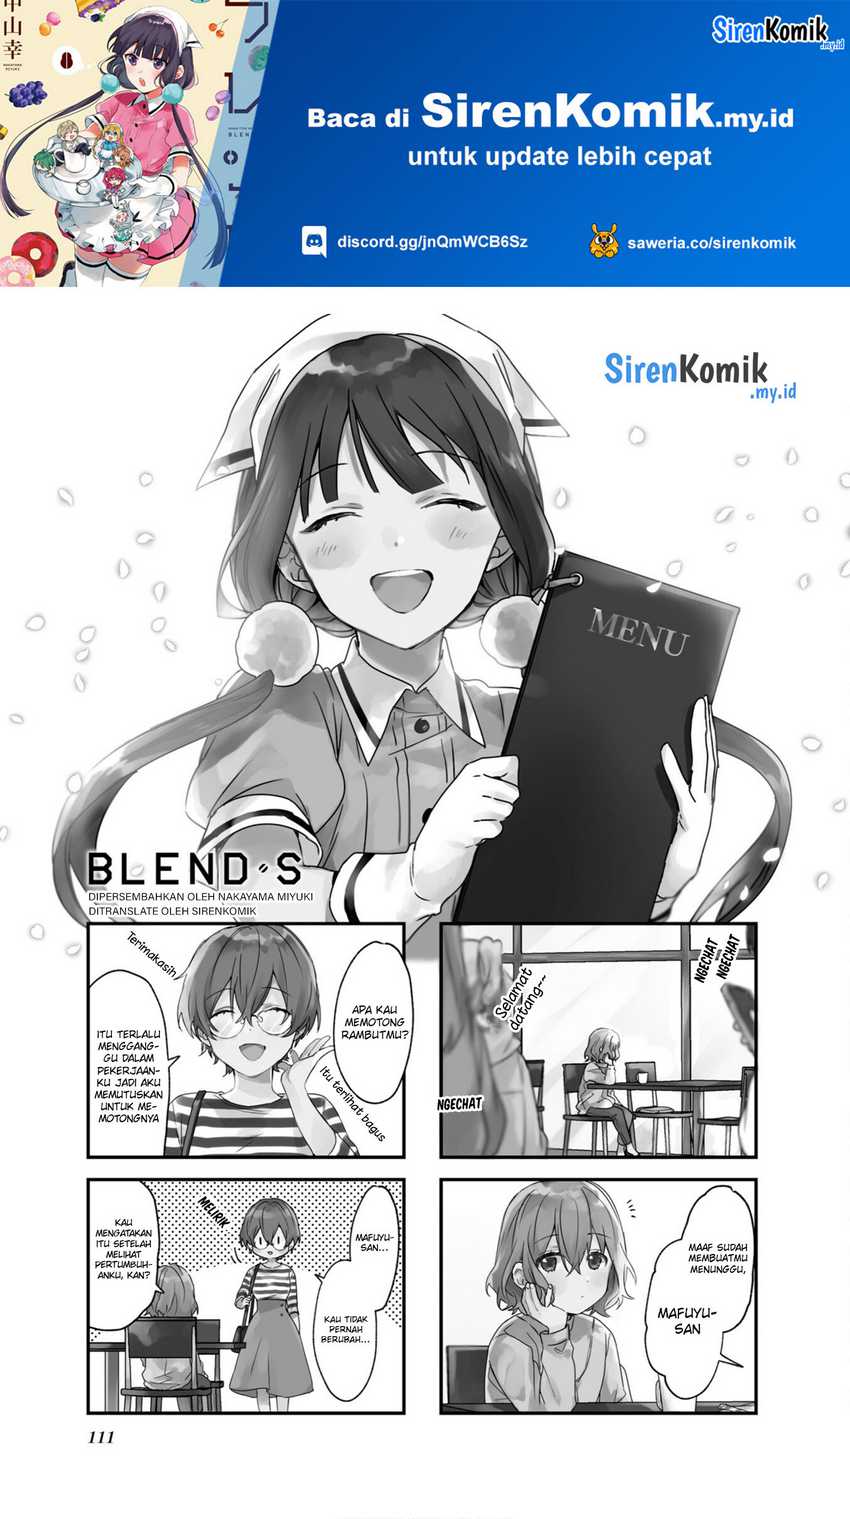 Blend S Chapter 113 END